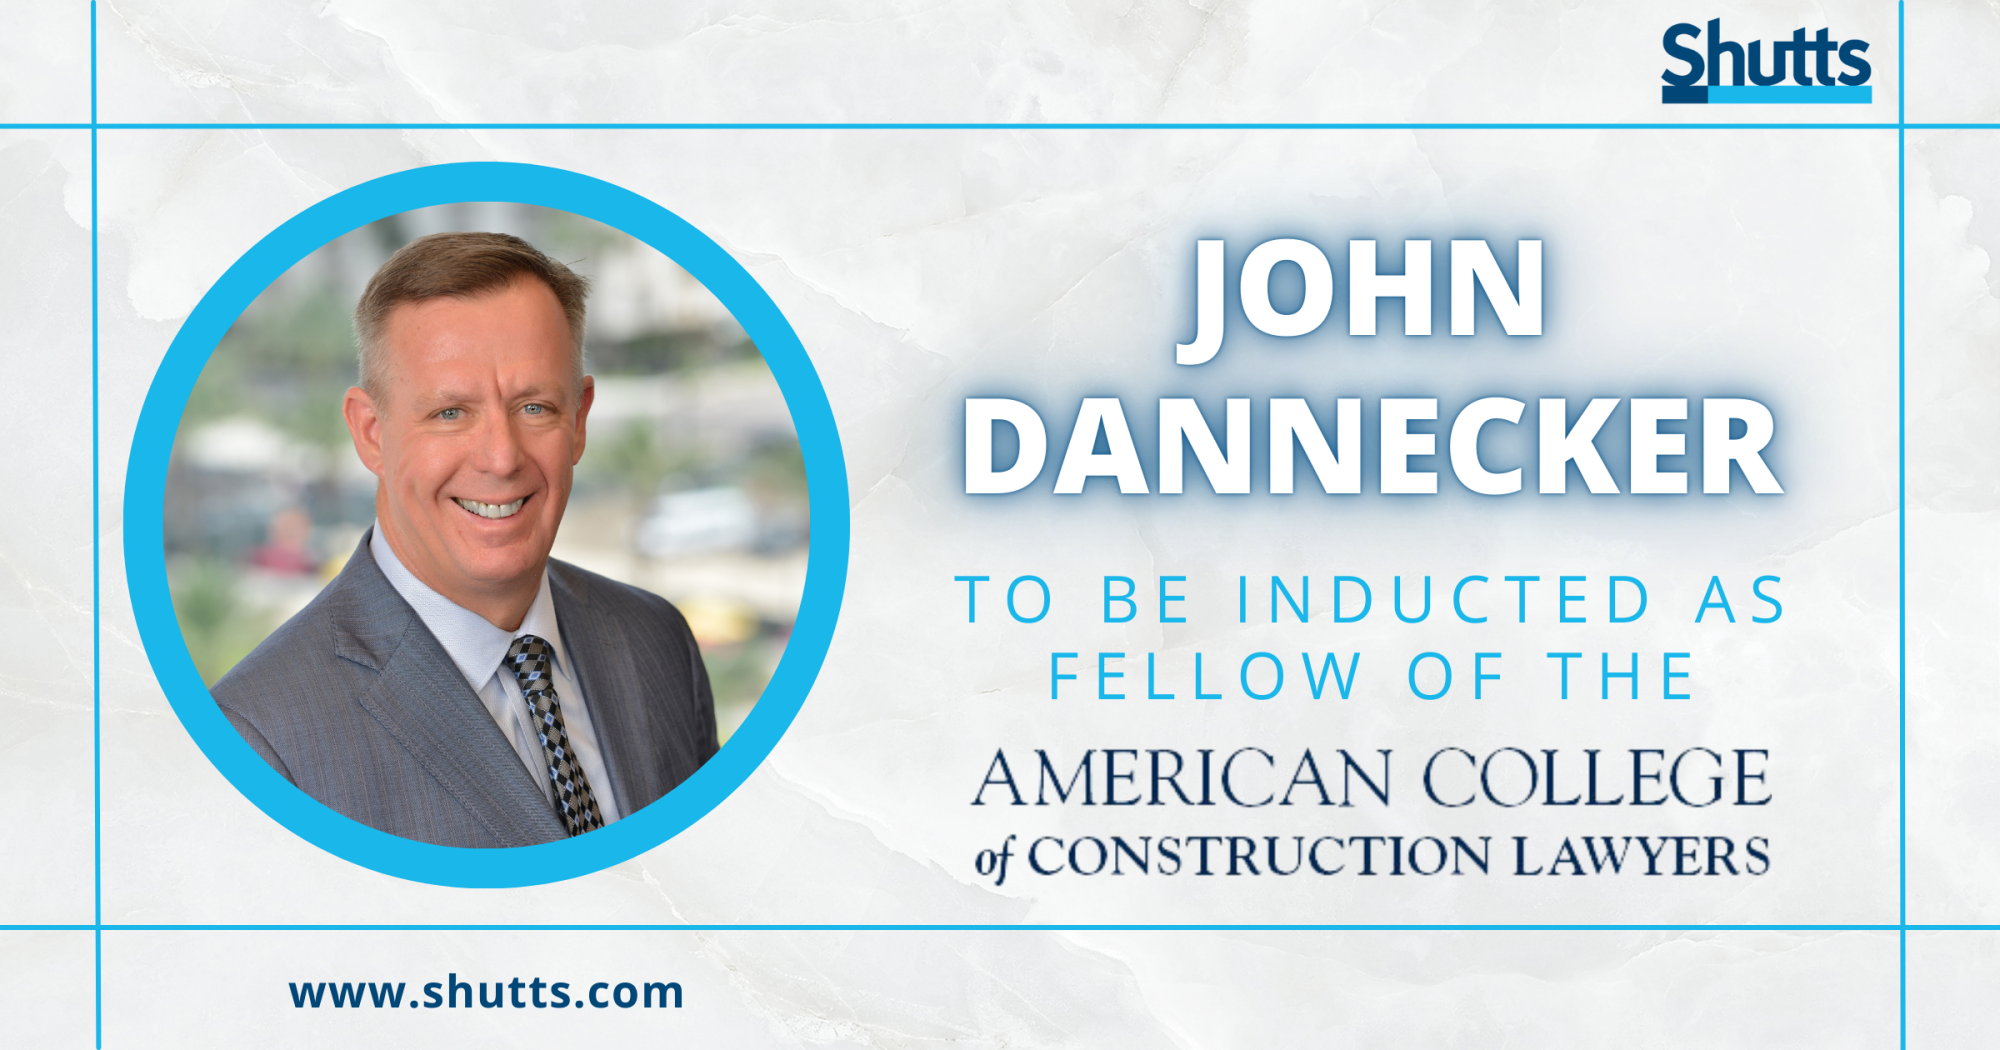 John Dannecker to be Inducted as Fellow of the American College of Construction Lawyers